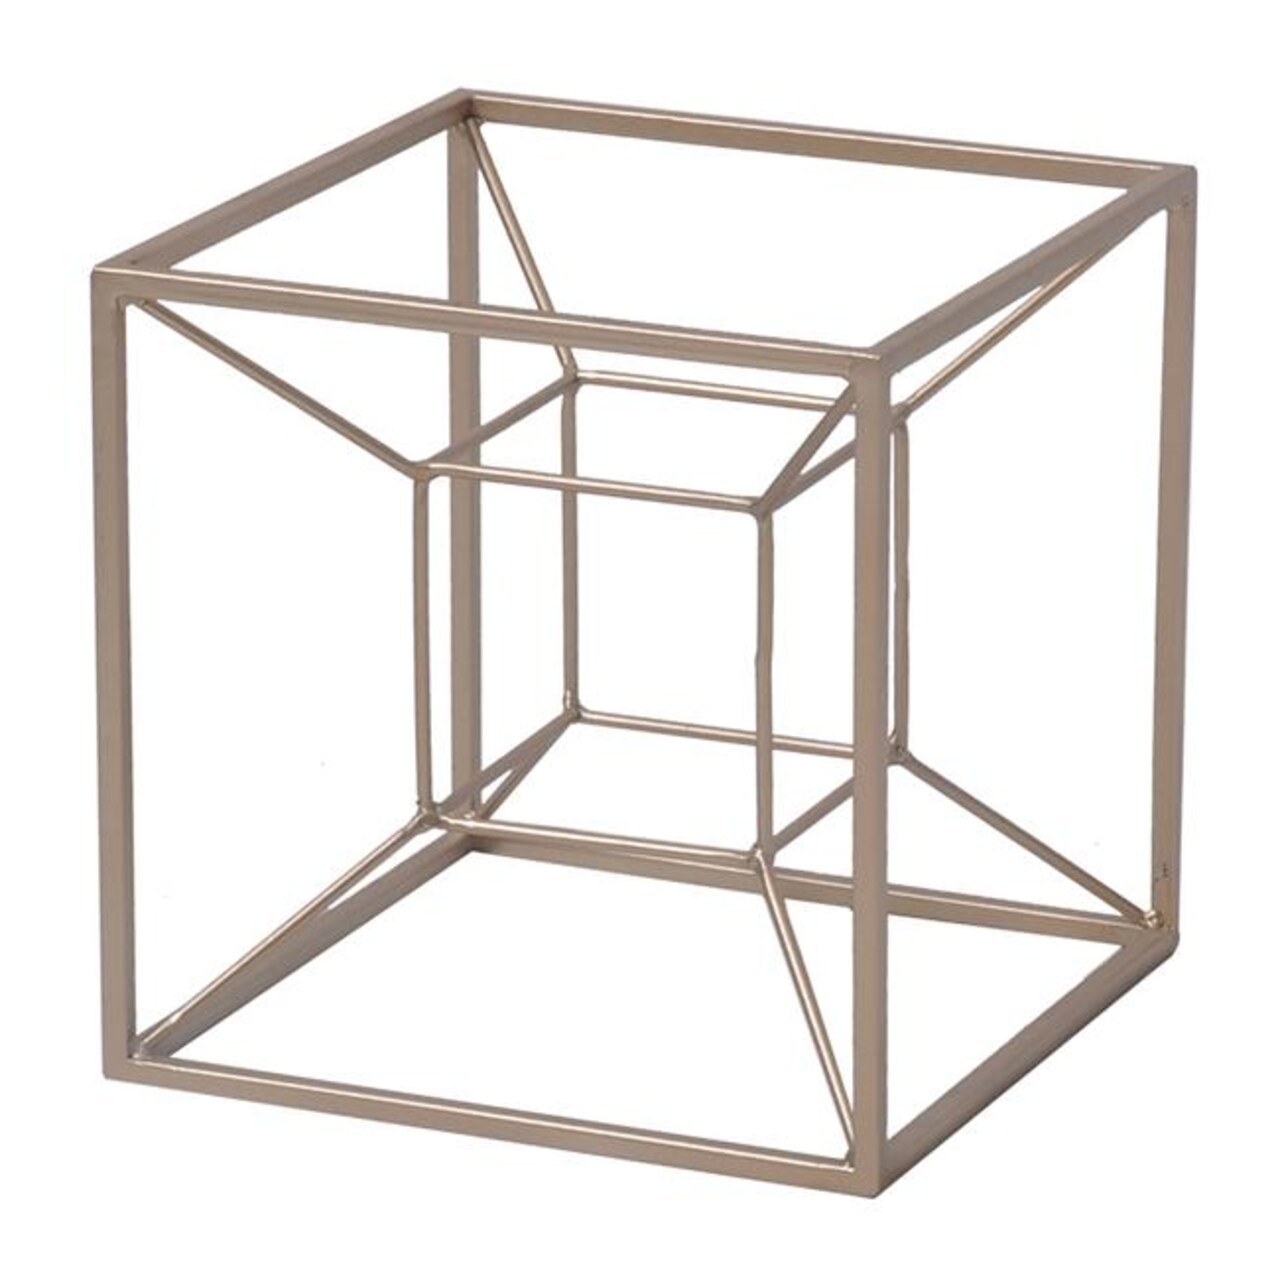 Cheungs 4921L 1.5 lbs Metal Tesseract Shaped Table Decor